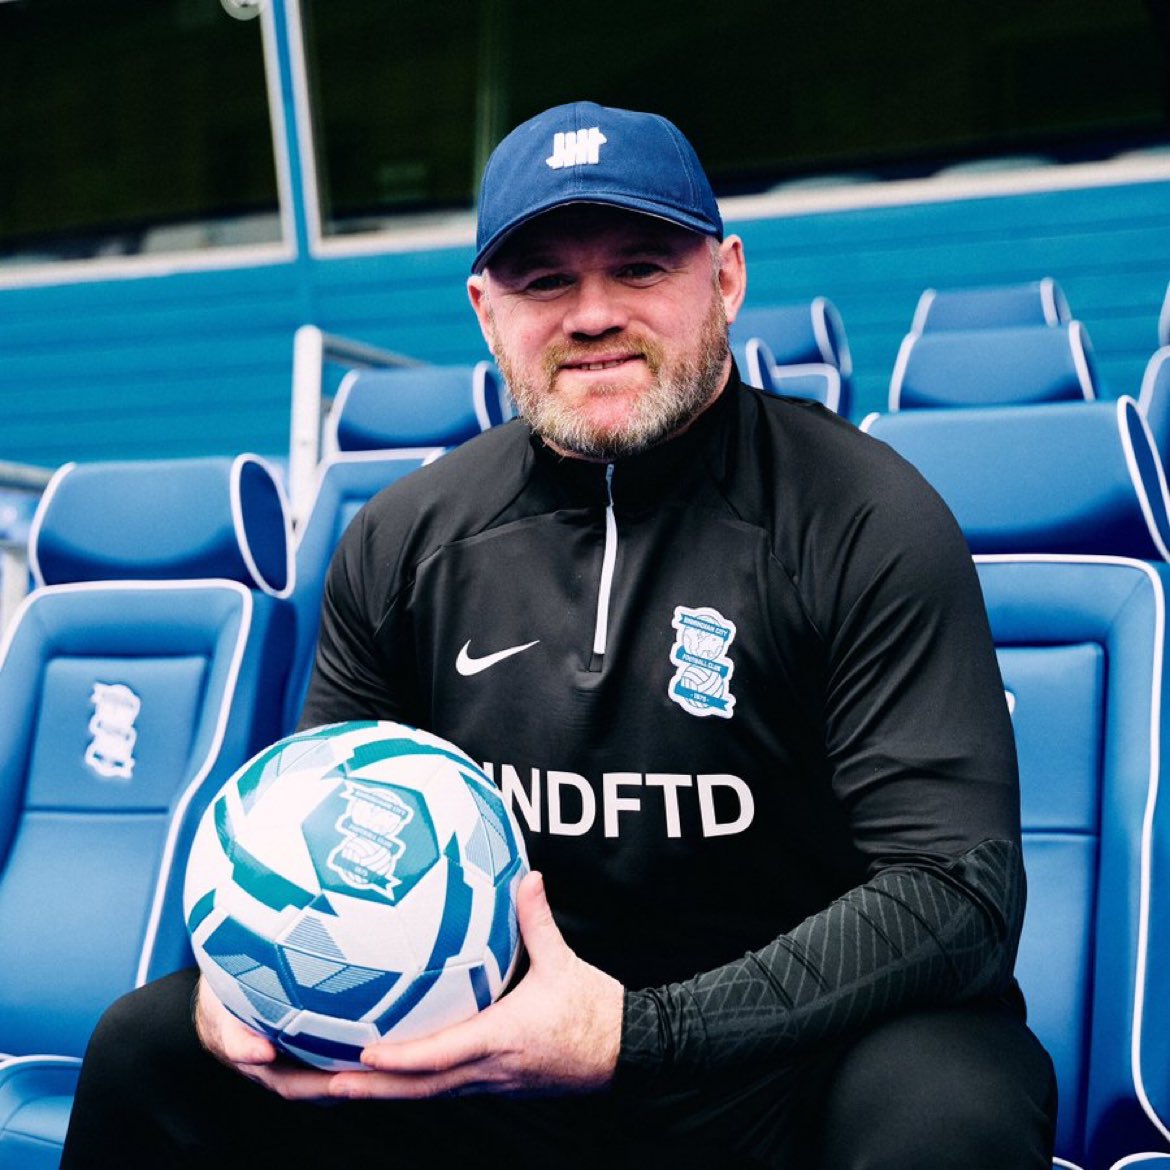 When Birmingham City hired Wayne Rooney they were in 5th place. They have now been relegated to Sky Bet League One. One of the worst ever managerial appointments. 😭😭😭